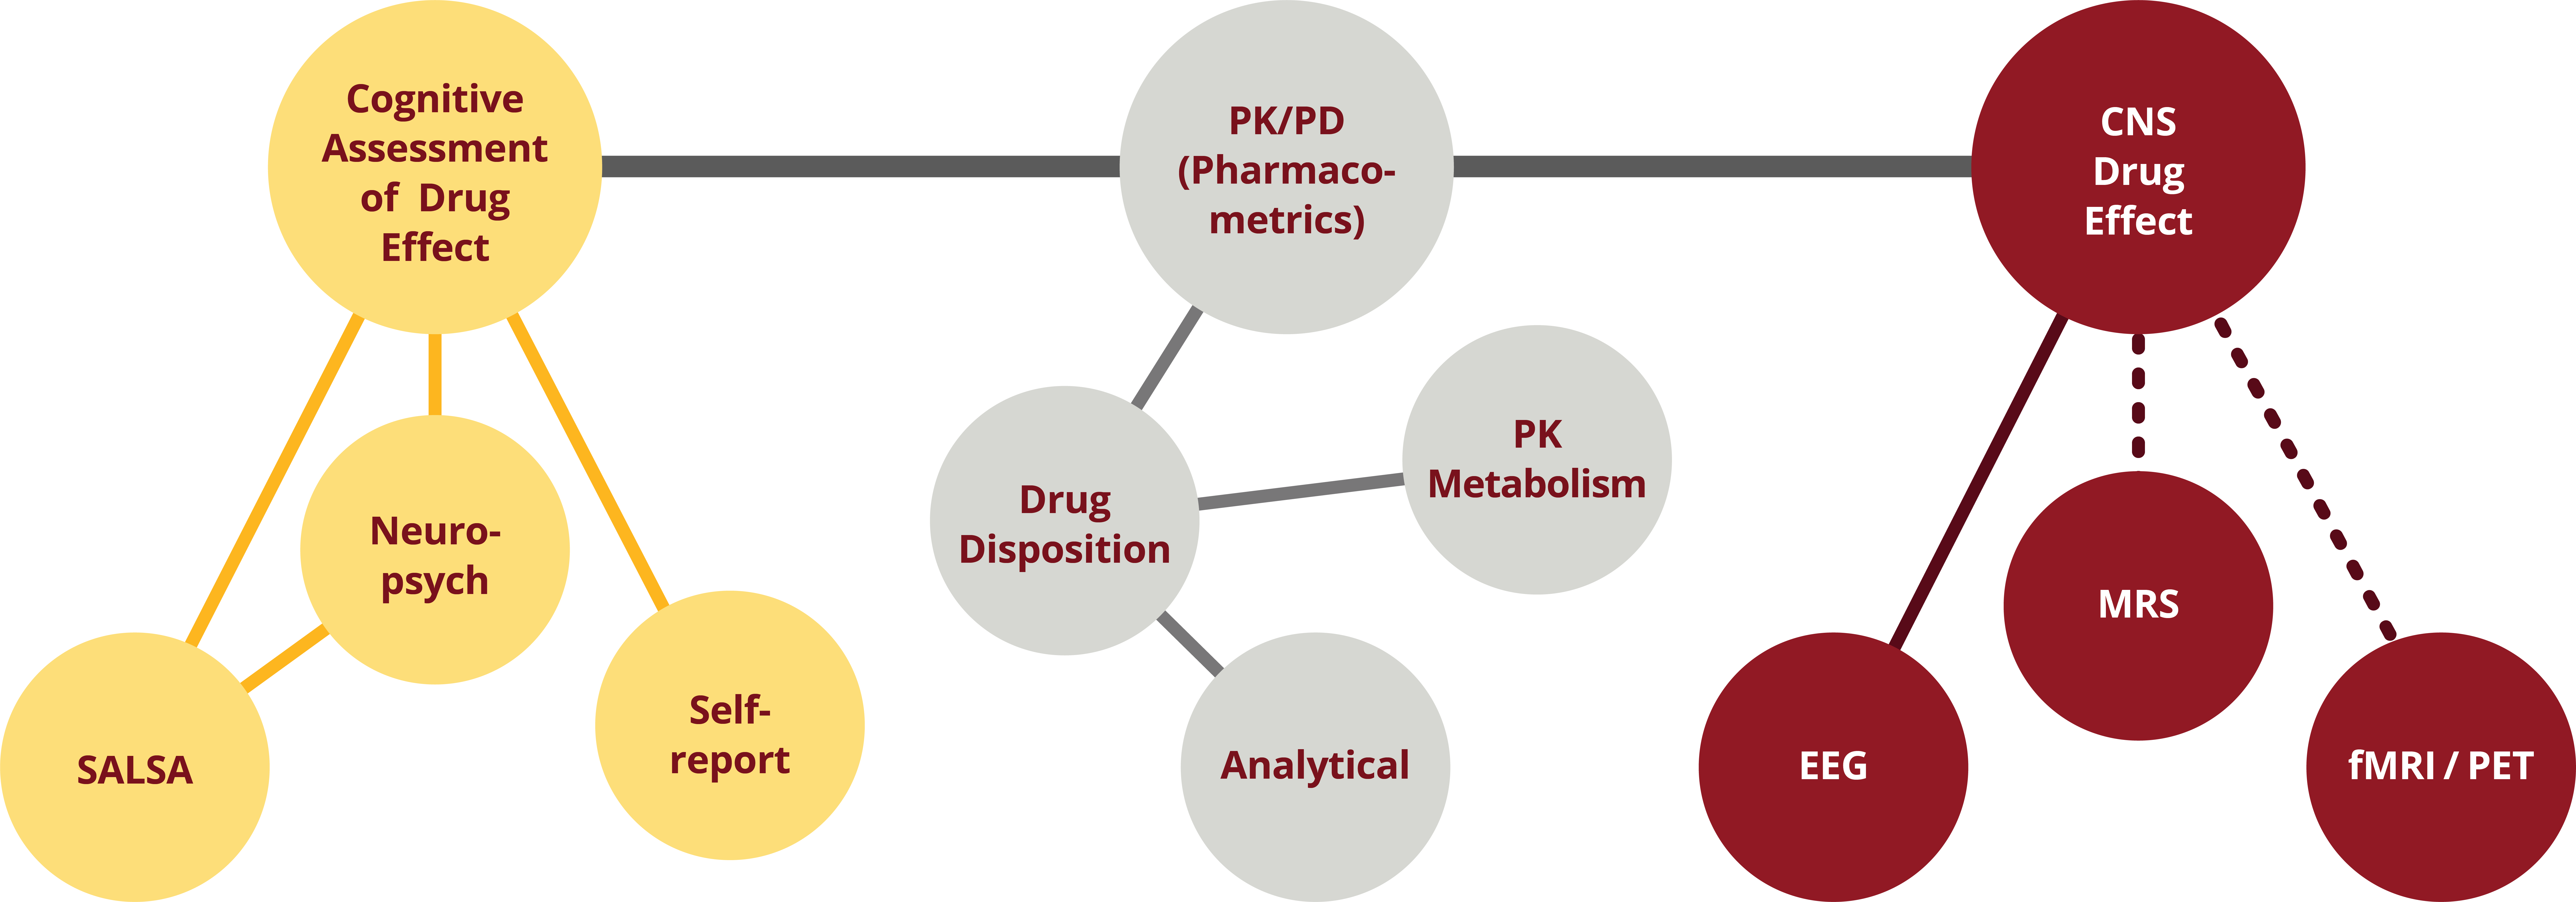 Chart describing drug effects on consignation. Described under the heading Description of Drug Effects on Cognition